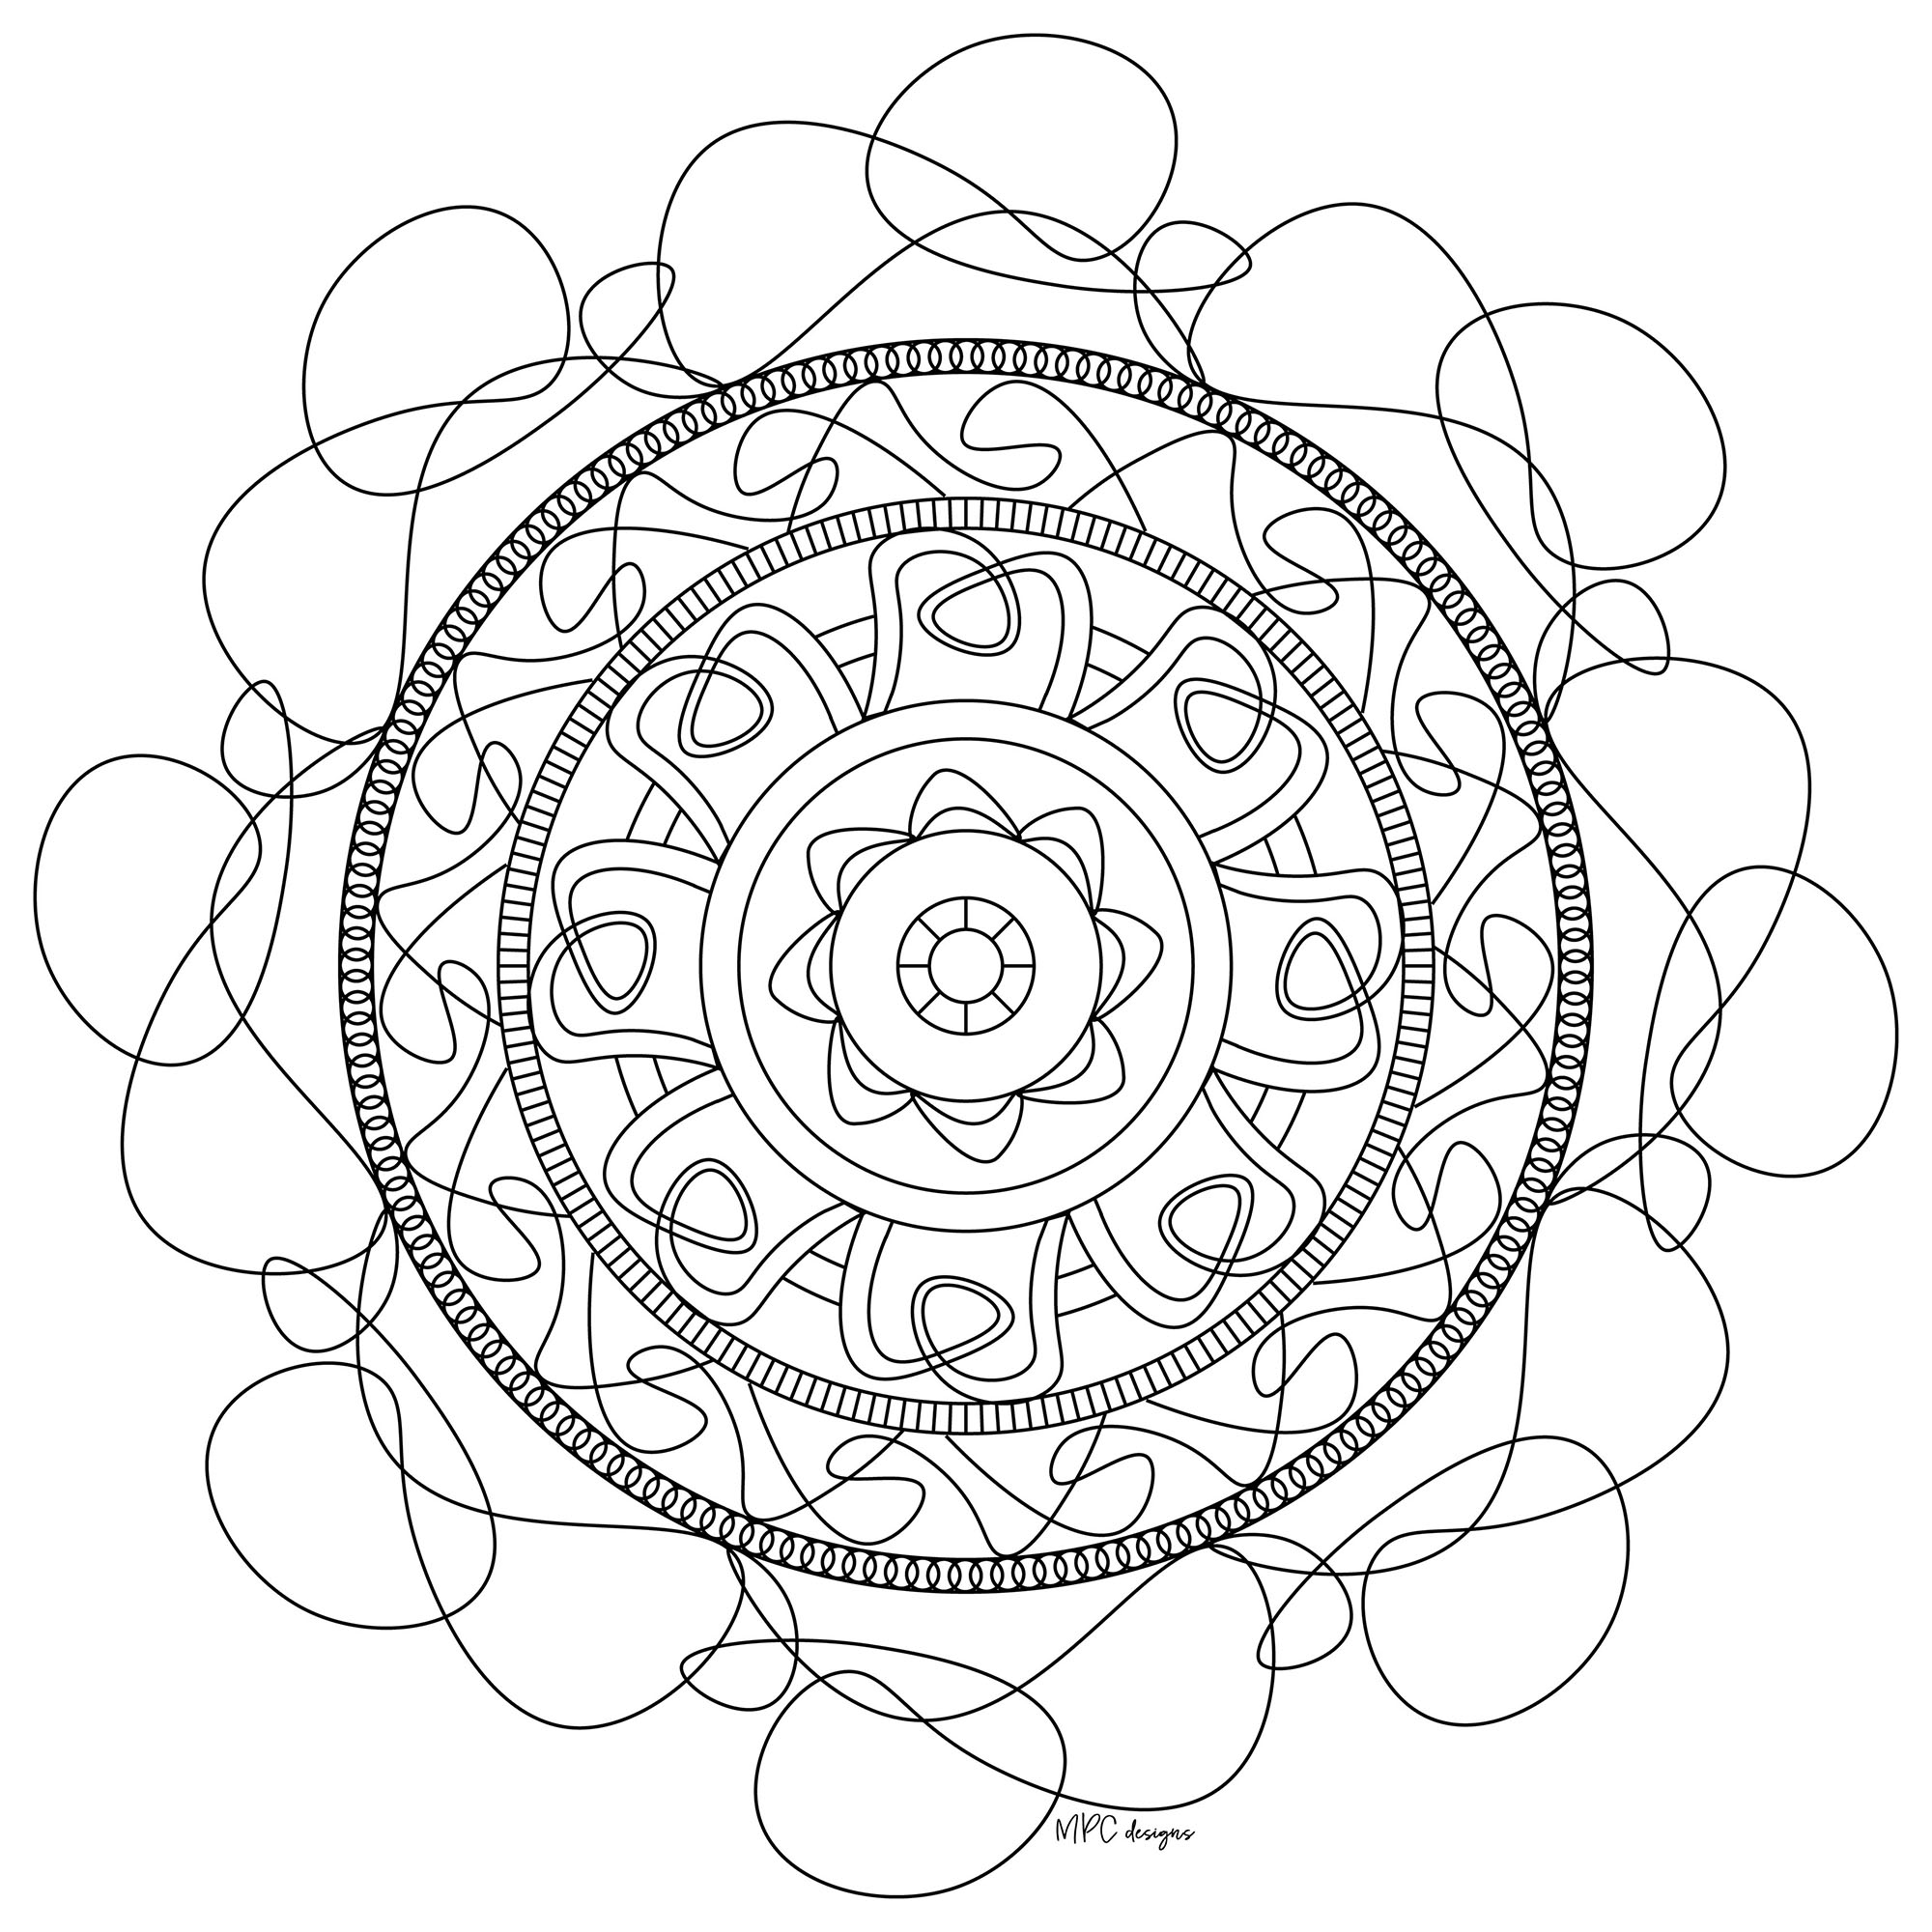 Mandala composed of fine and tortuous lines